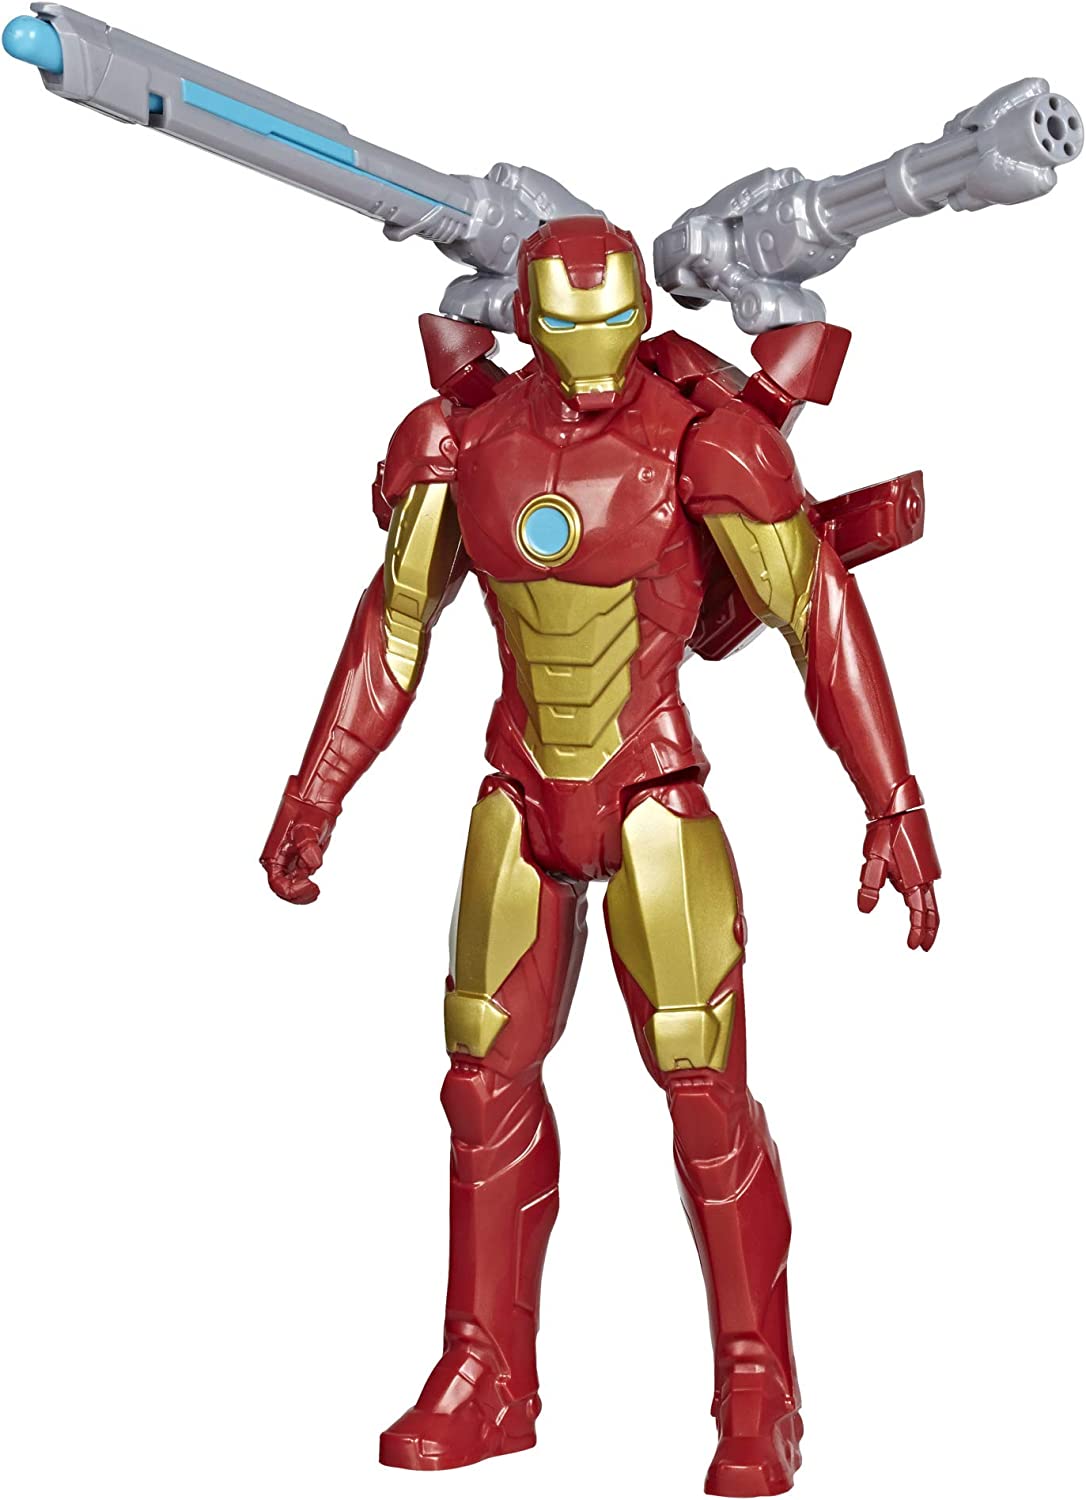  Marvel Spider-Man Titan Hero Series Action Figure, 30-cm-Scale  Super Hero Toy, for Kids Ages 4 and Up : Everything Else